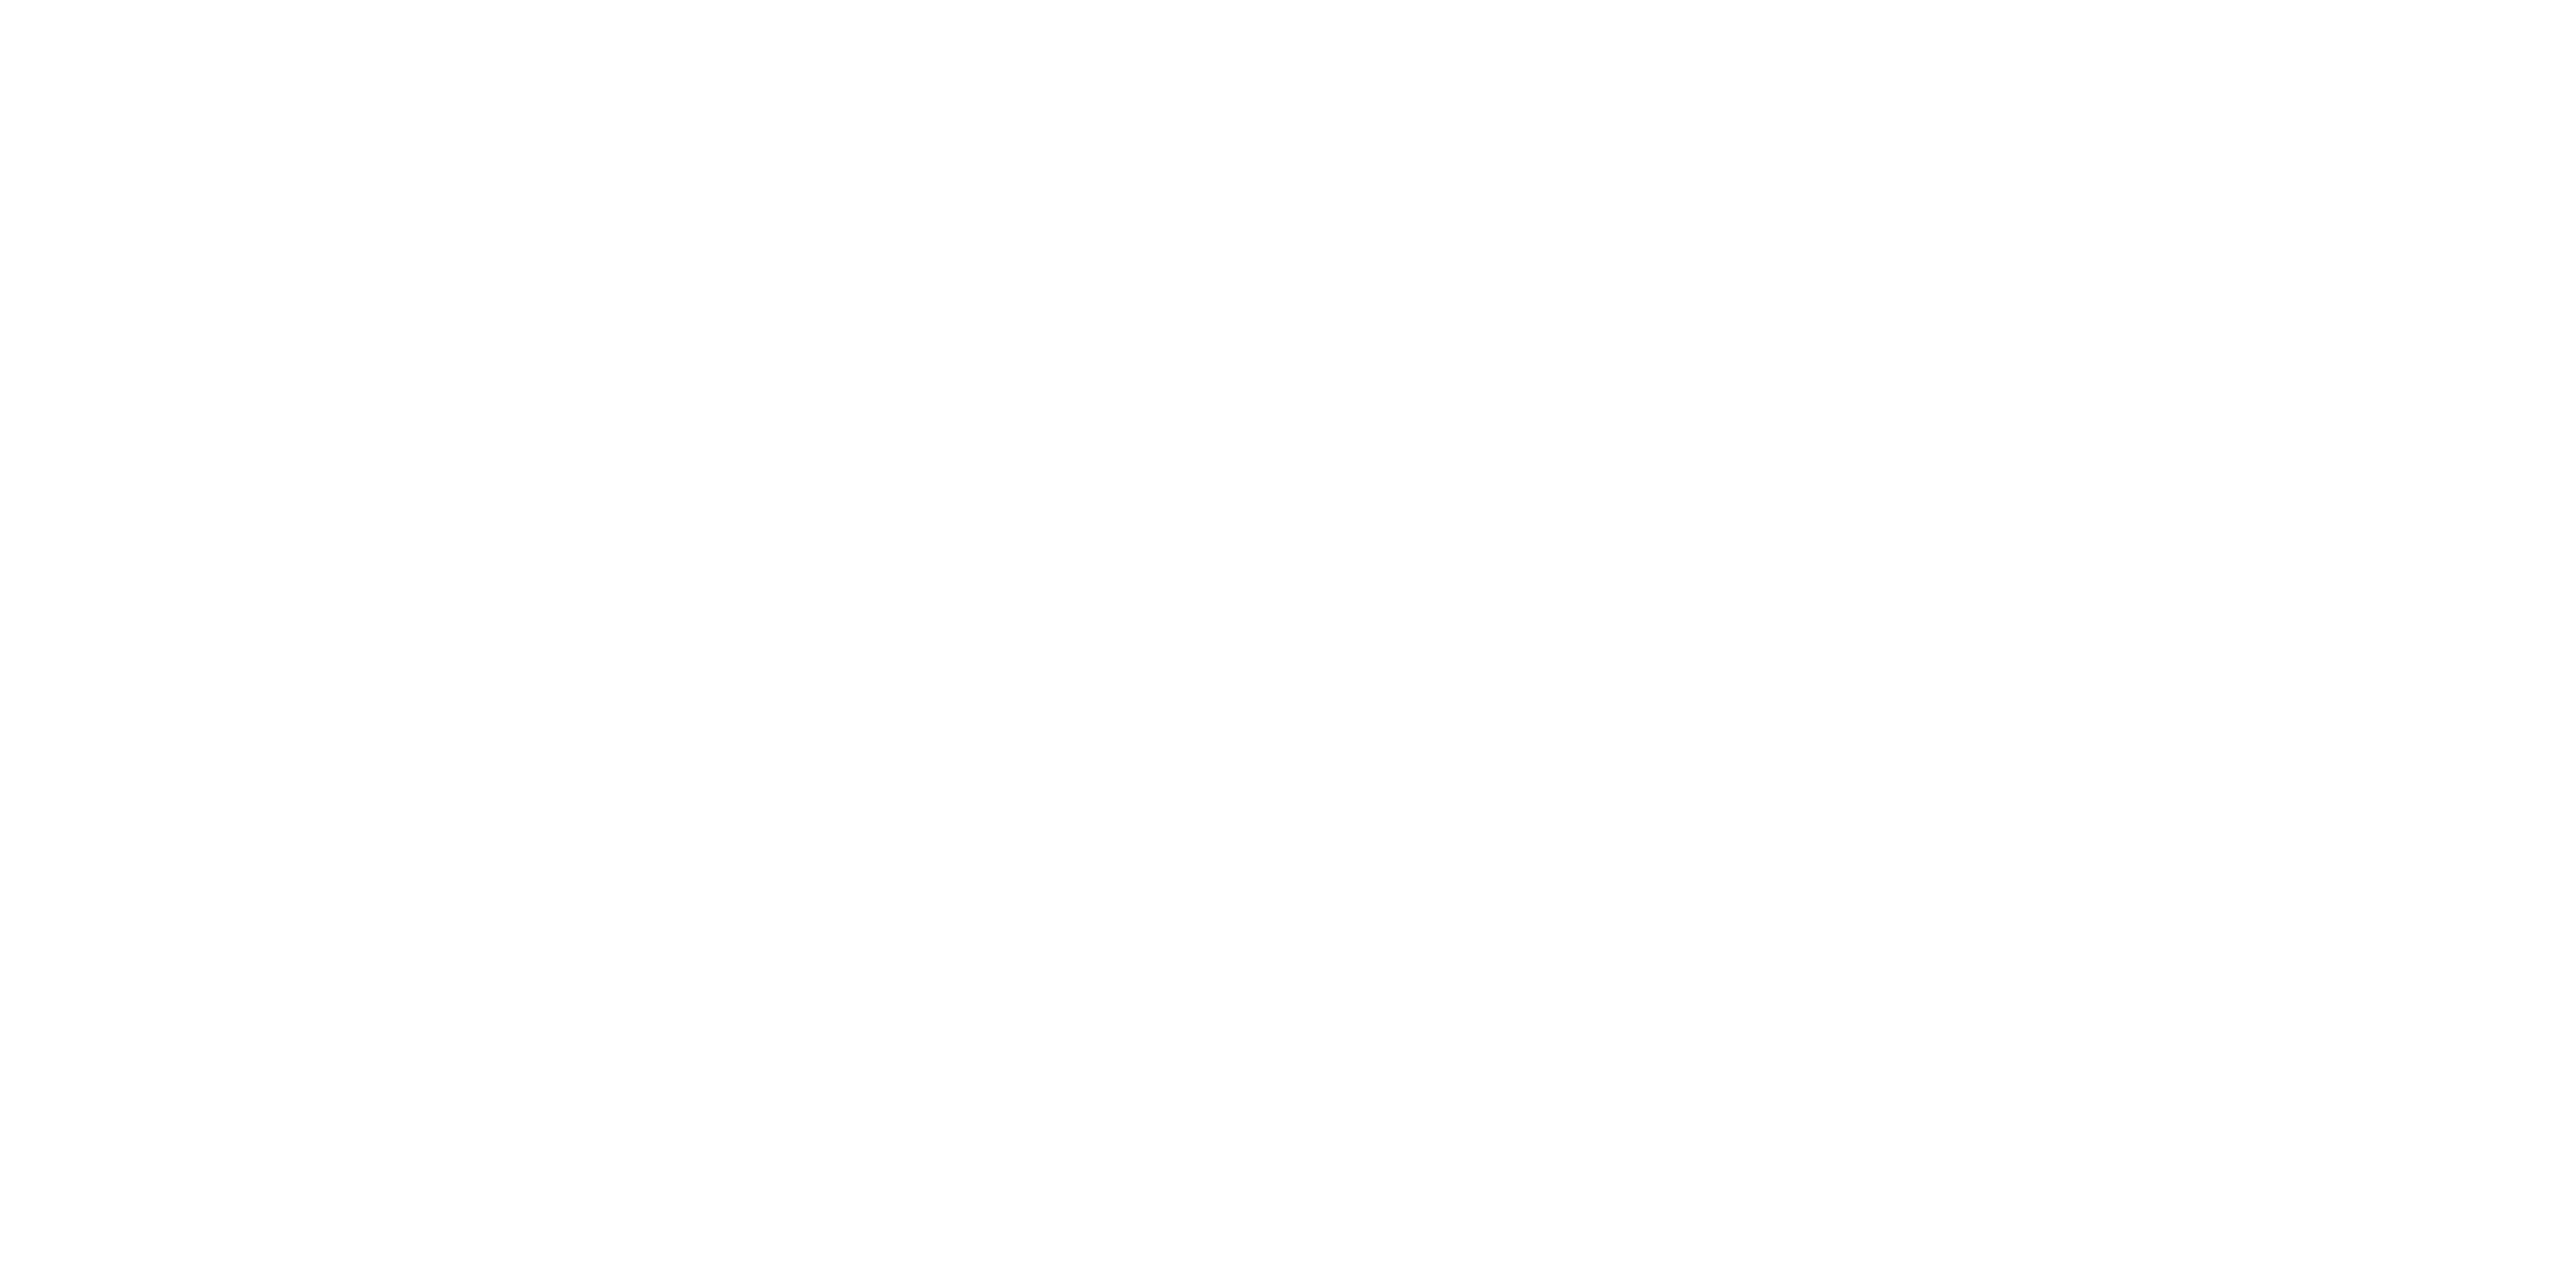 The Cosmology Group